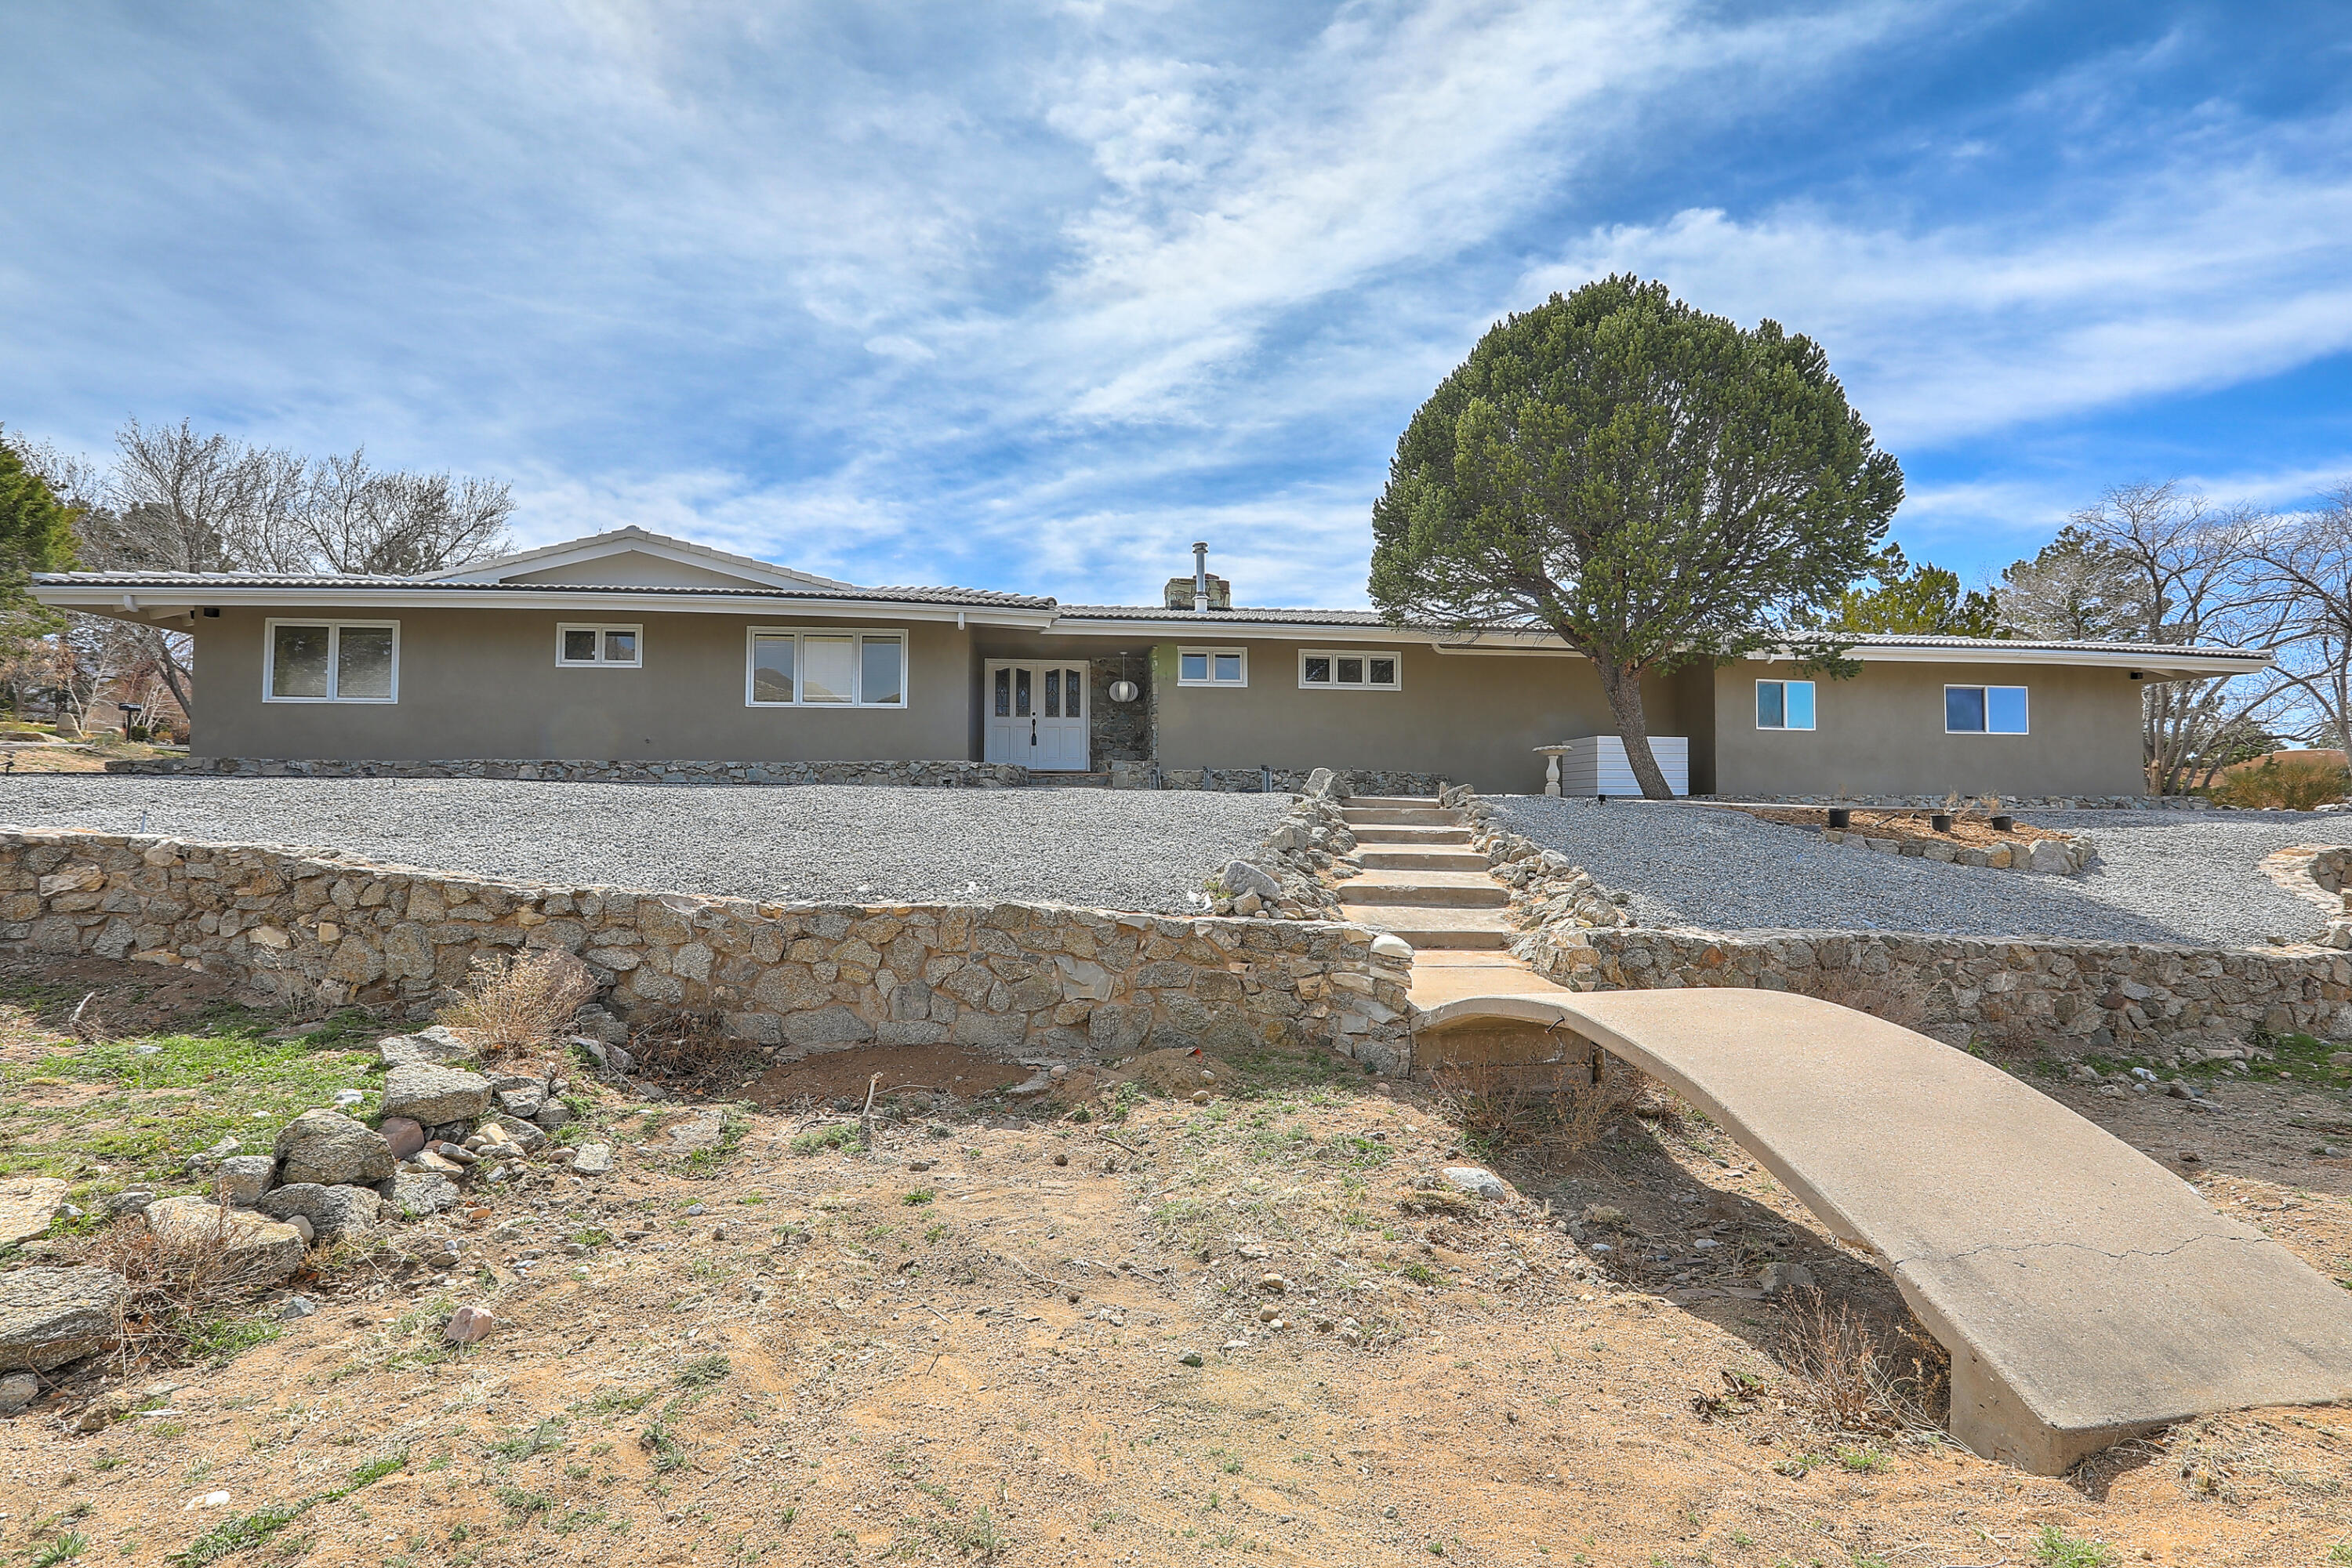 907 Stagecoach Road SE, Albuquerque, New Mexico 87123, 4 Bedrooms Bedrooms, ,3 BathroomsBathrooms,Residential,For Sale,907 Stagecoach Road SE,1058786